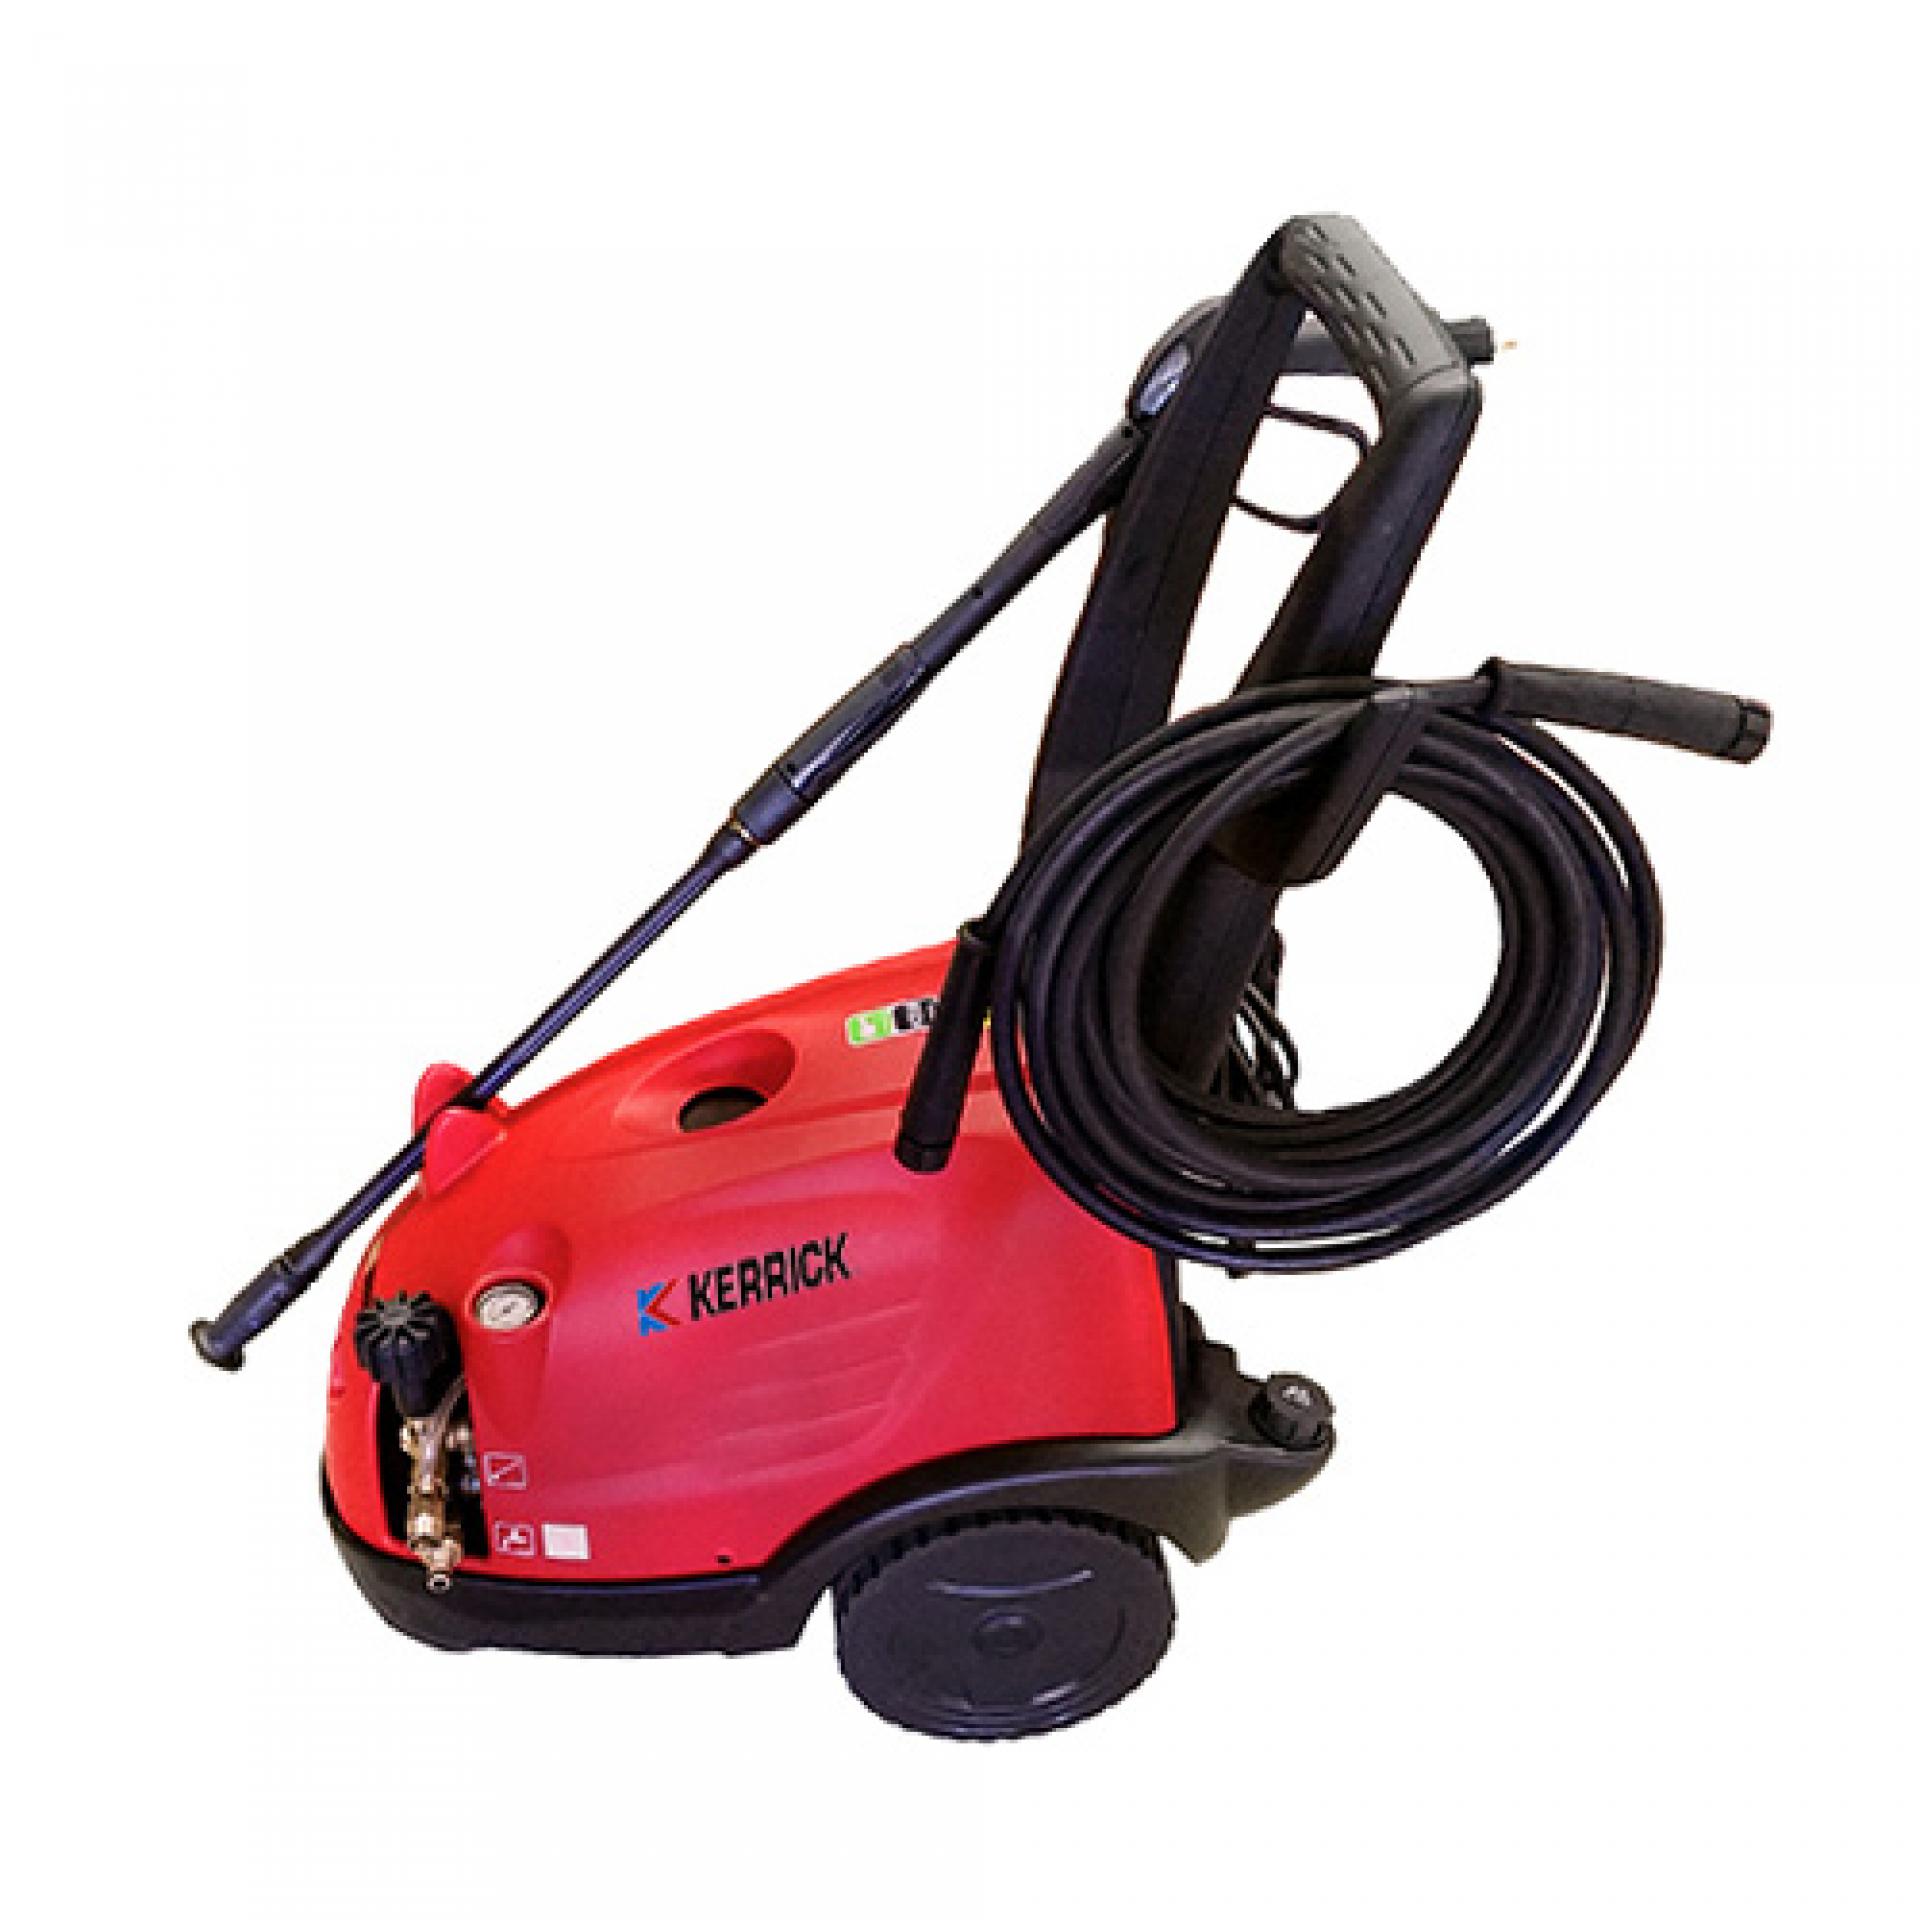 Elite Electric Pressure Washer Commercial Cleaning Supplies Auckland Counties Cleaning